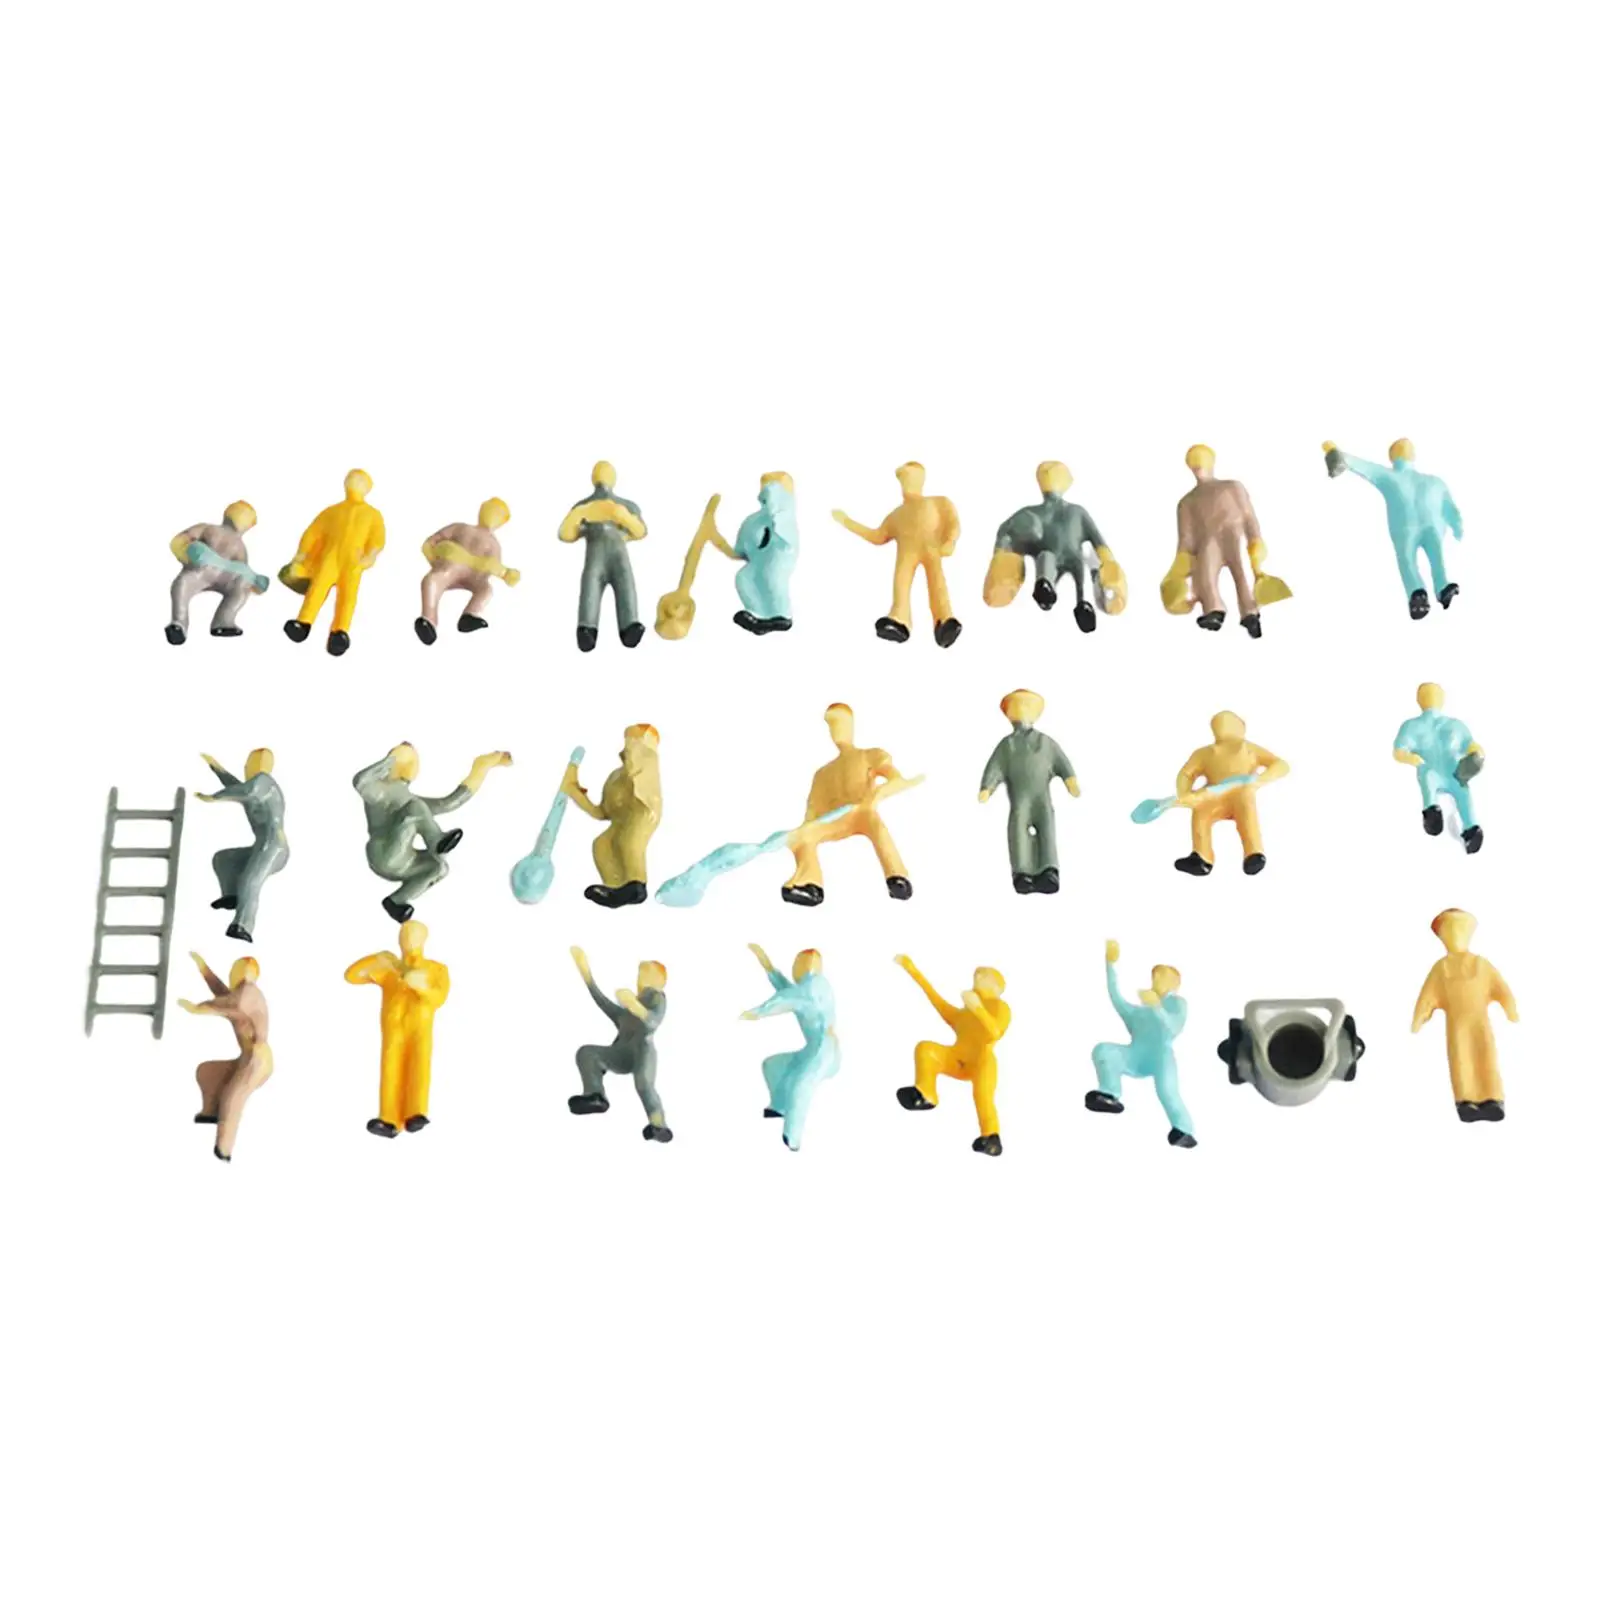 25x 1/87 Mini Railroad Worker Figure with Tools Building Toys HO Gauge Sand Table Scene Hand Painted Figurines Supplies Decor